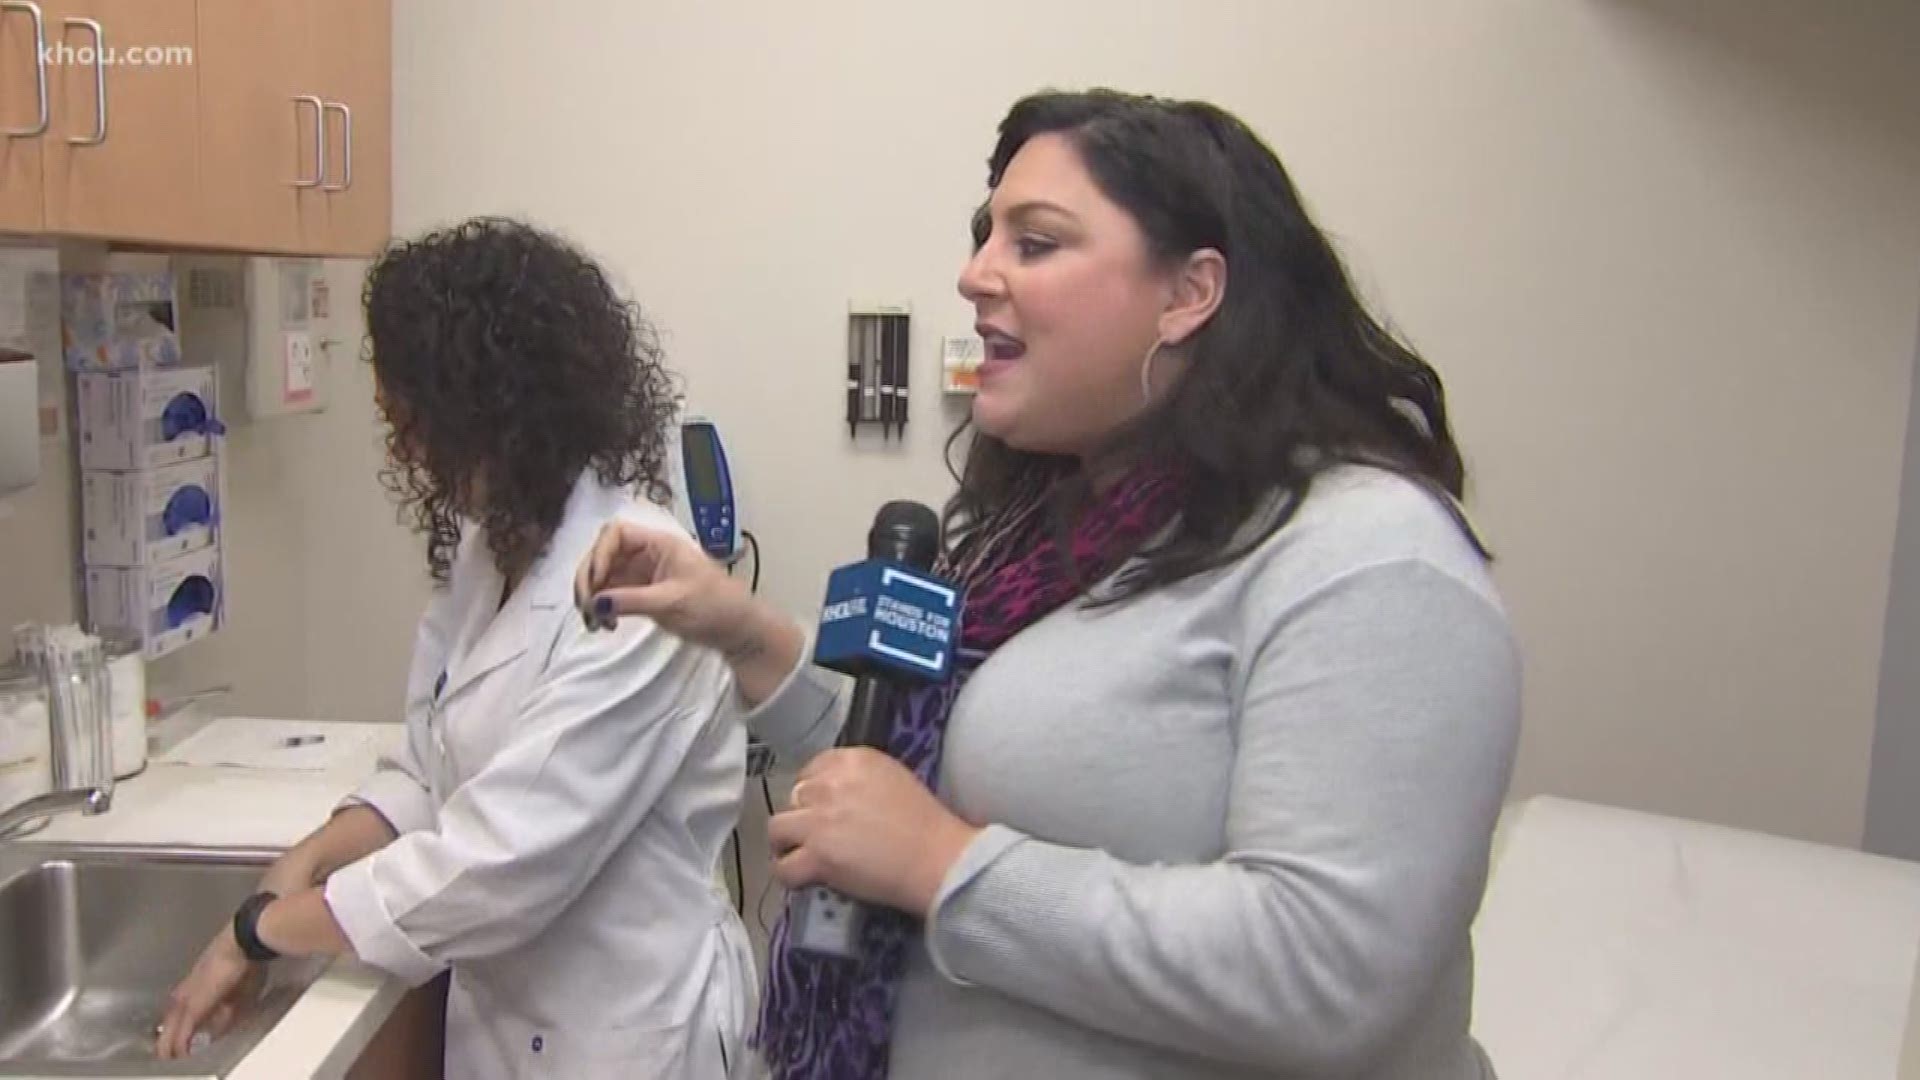 KHOU 11 Reporter Melissa Correa speaks to Dr. Isabella Valdez with Baylor College of Medicine about how to stay healthy in the cold weather.